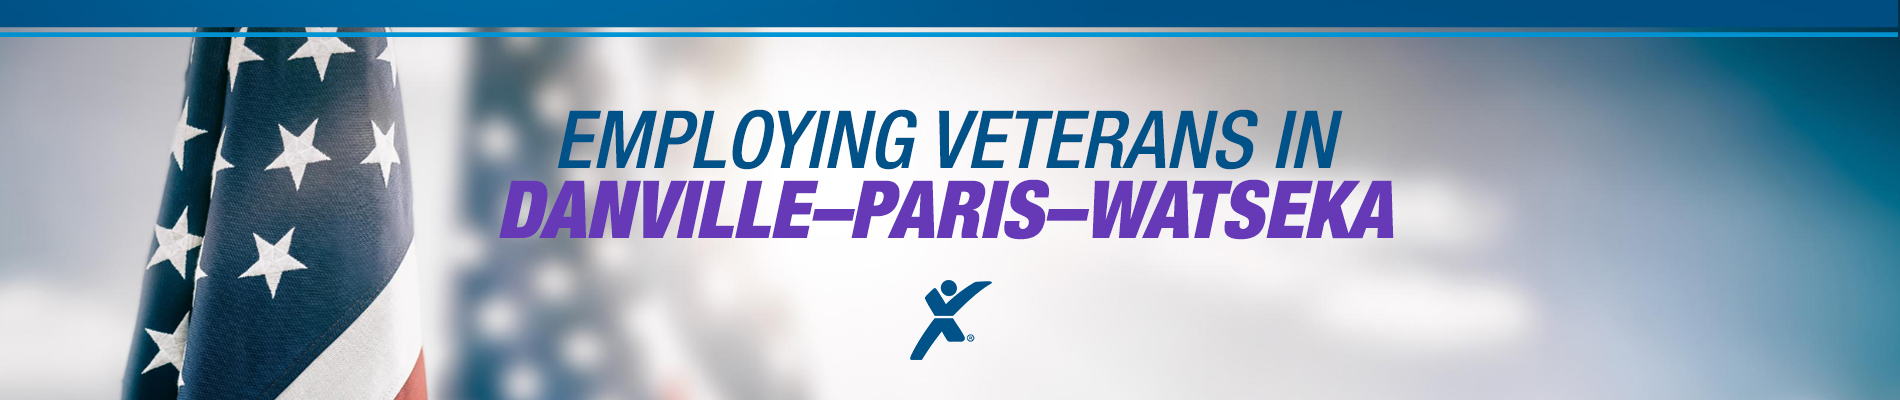 Express Is Employing Vets in Danville, Paris, and Watseka, IL